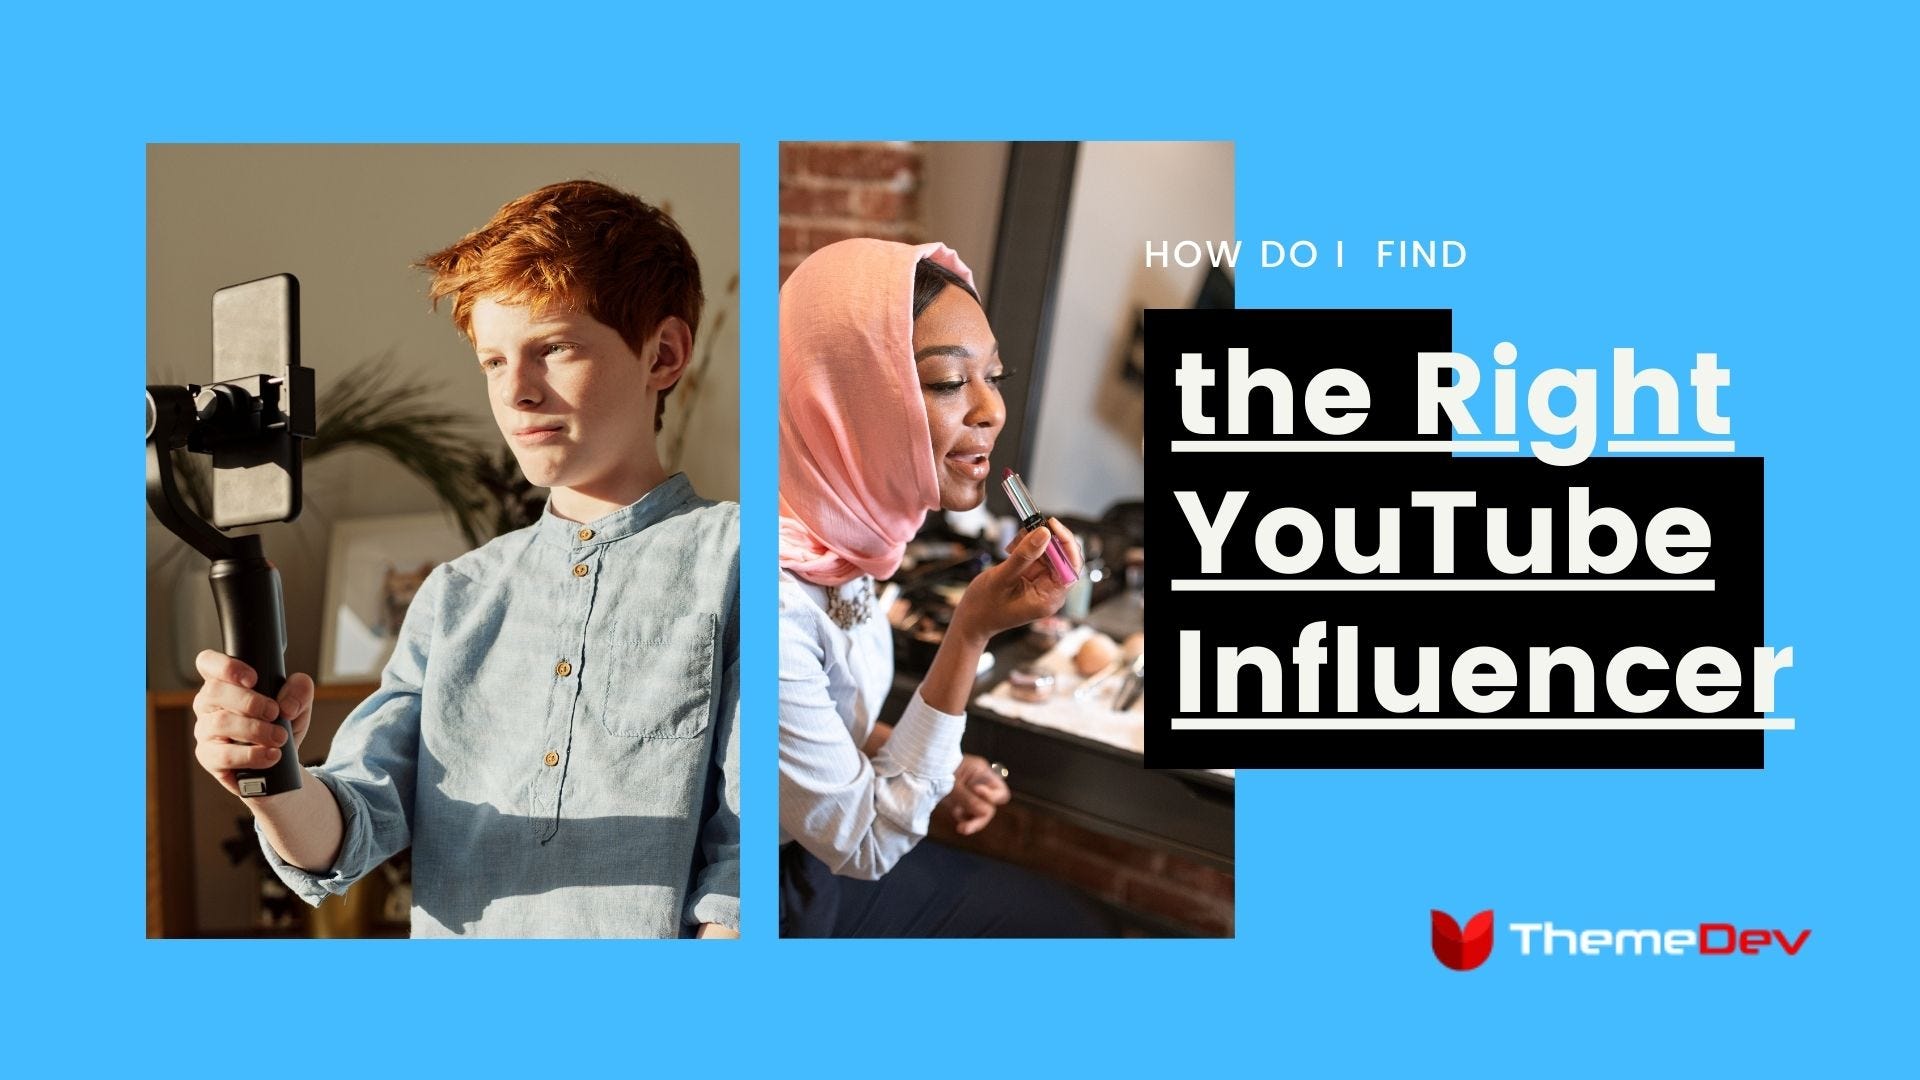 How Do I Find the Right YouTube Influencer?